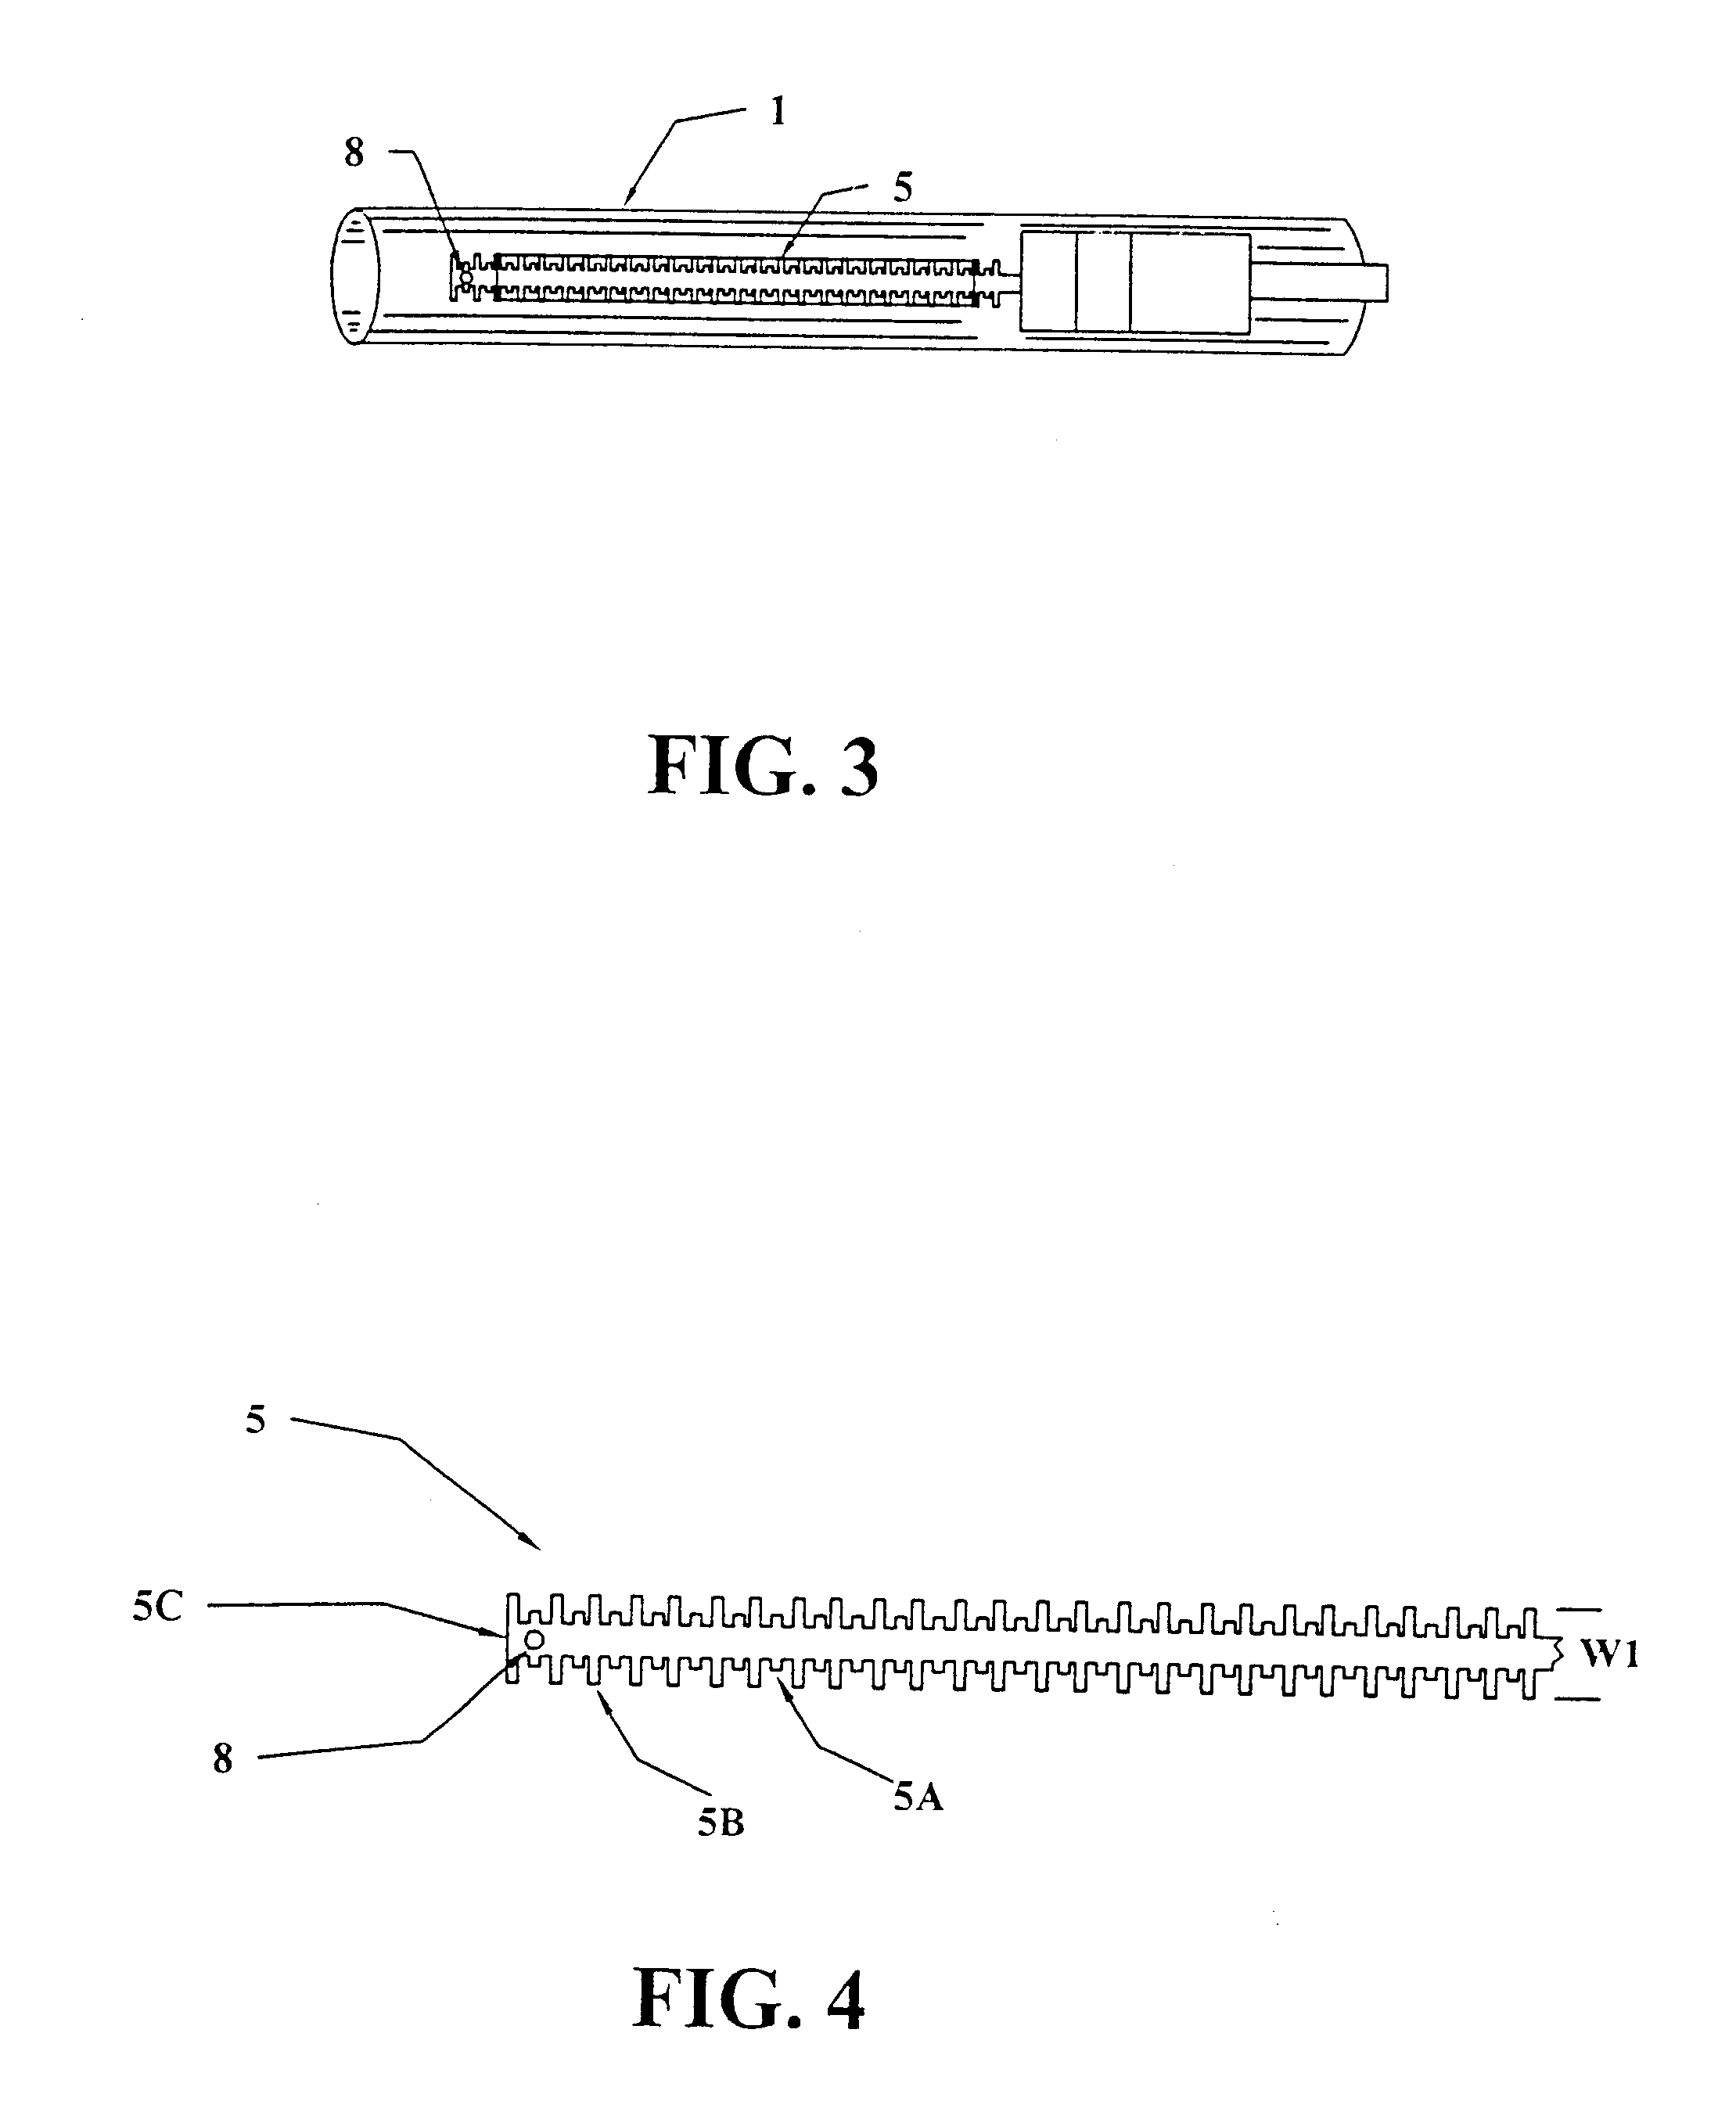 Clippings catcher attachment for combined trimmer and vacuum apparatus